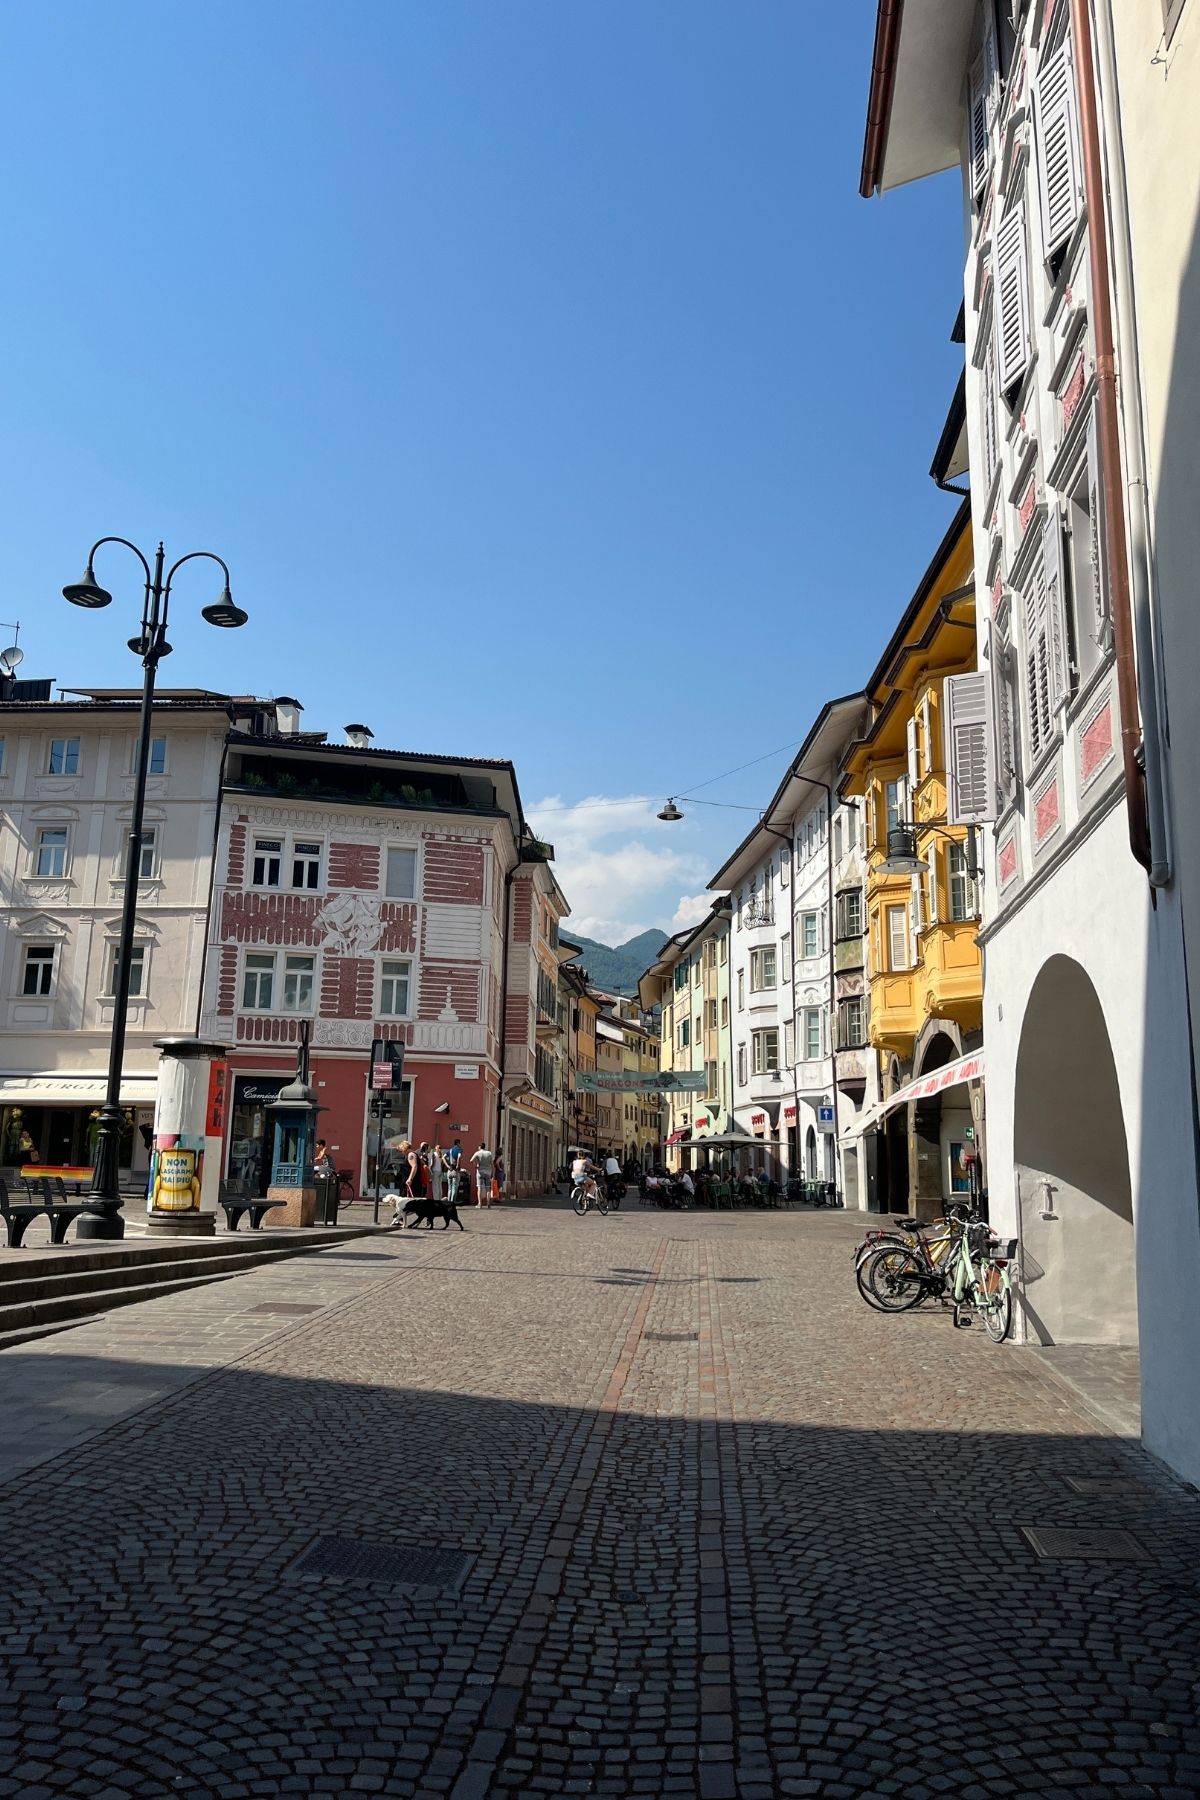 bolzano architecture during the day.